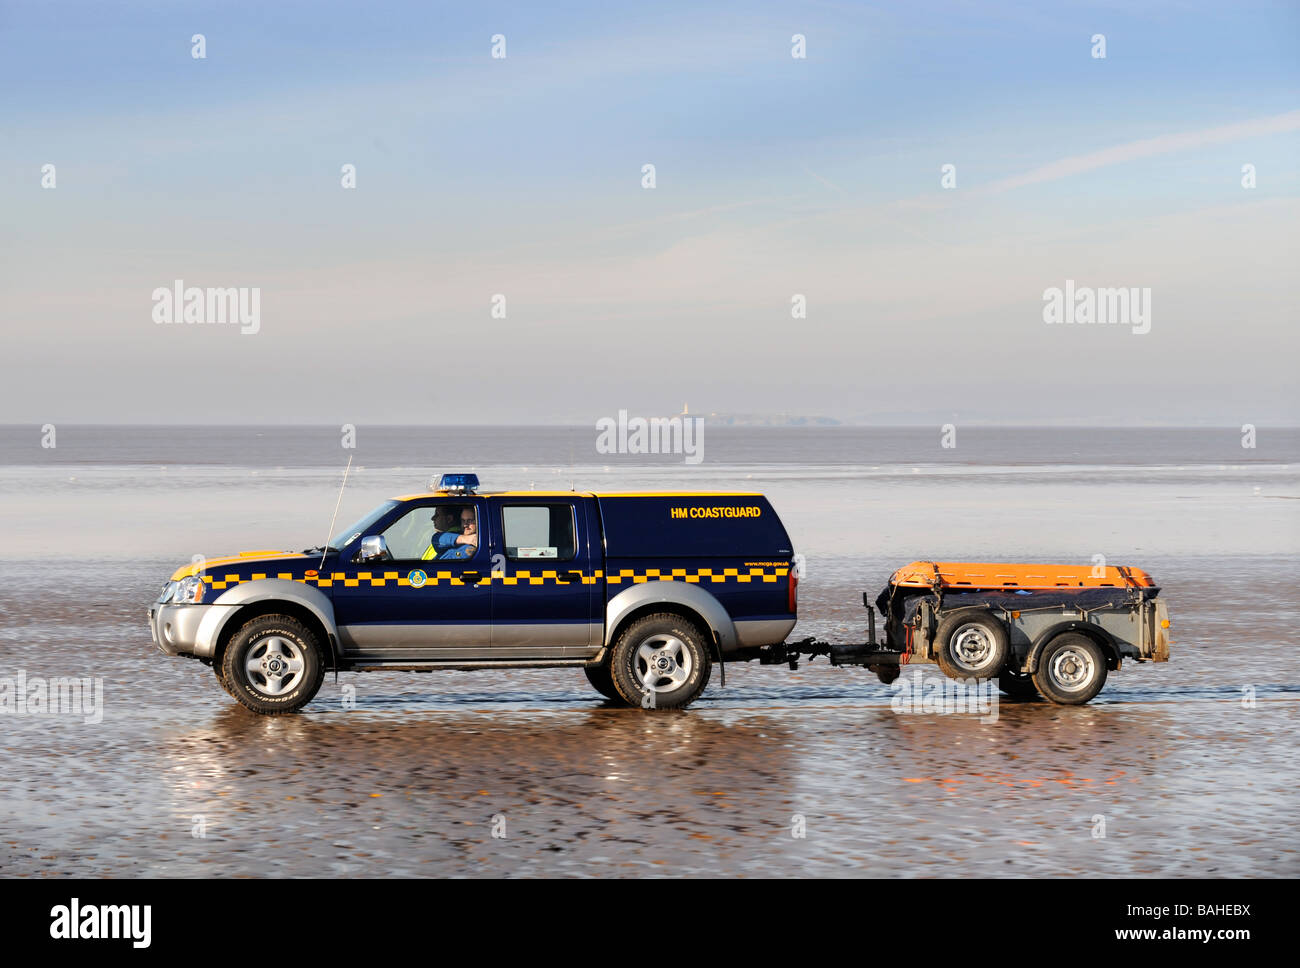 A COASTGUARD VEHICLE CROSSING THE SAND ON THE BEACH AT WESTON SUPER MARE SOMERSET UK Stock Photo